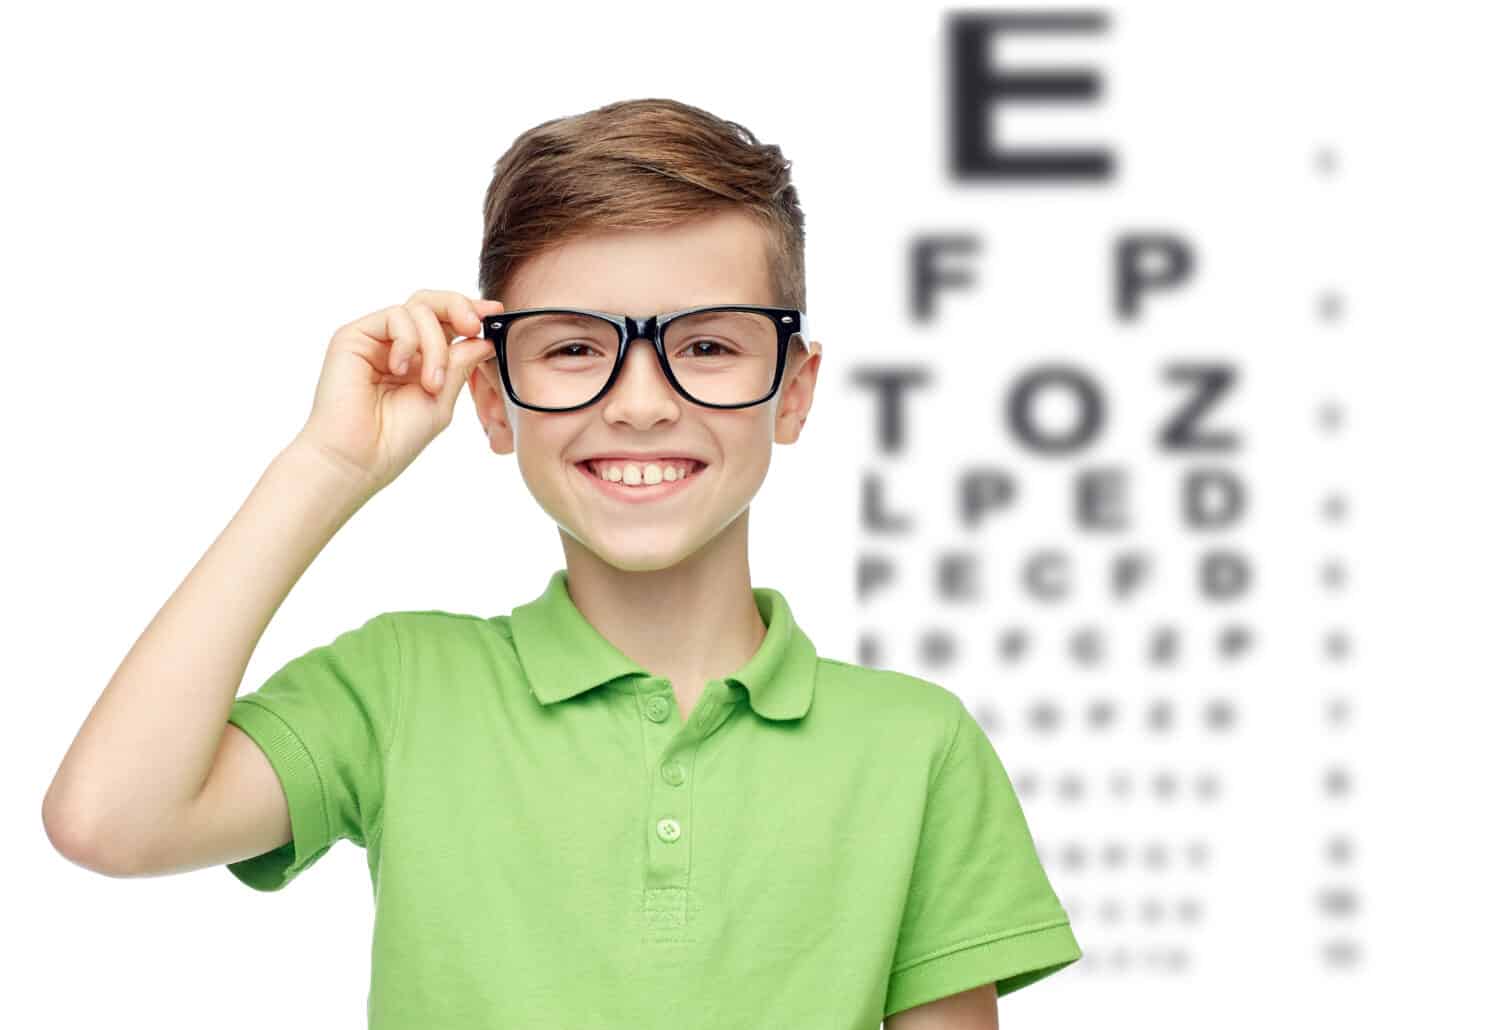 childhood, vision, eyesight and people concept - happy smiling boy in green polo t-shirt in eyeglasses over eye chart background